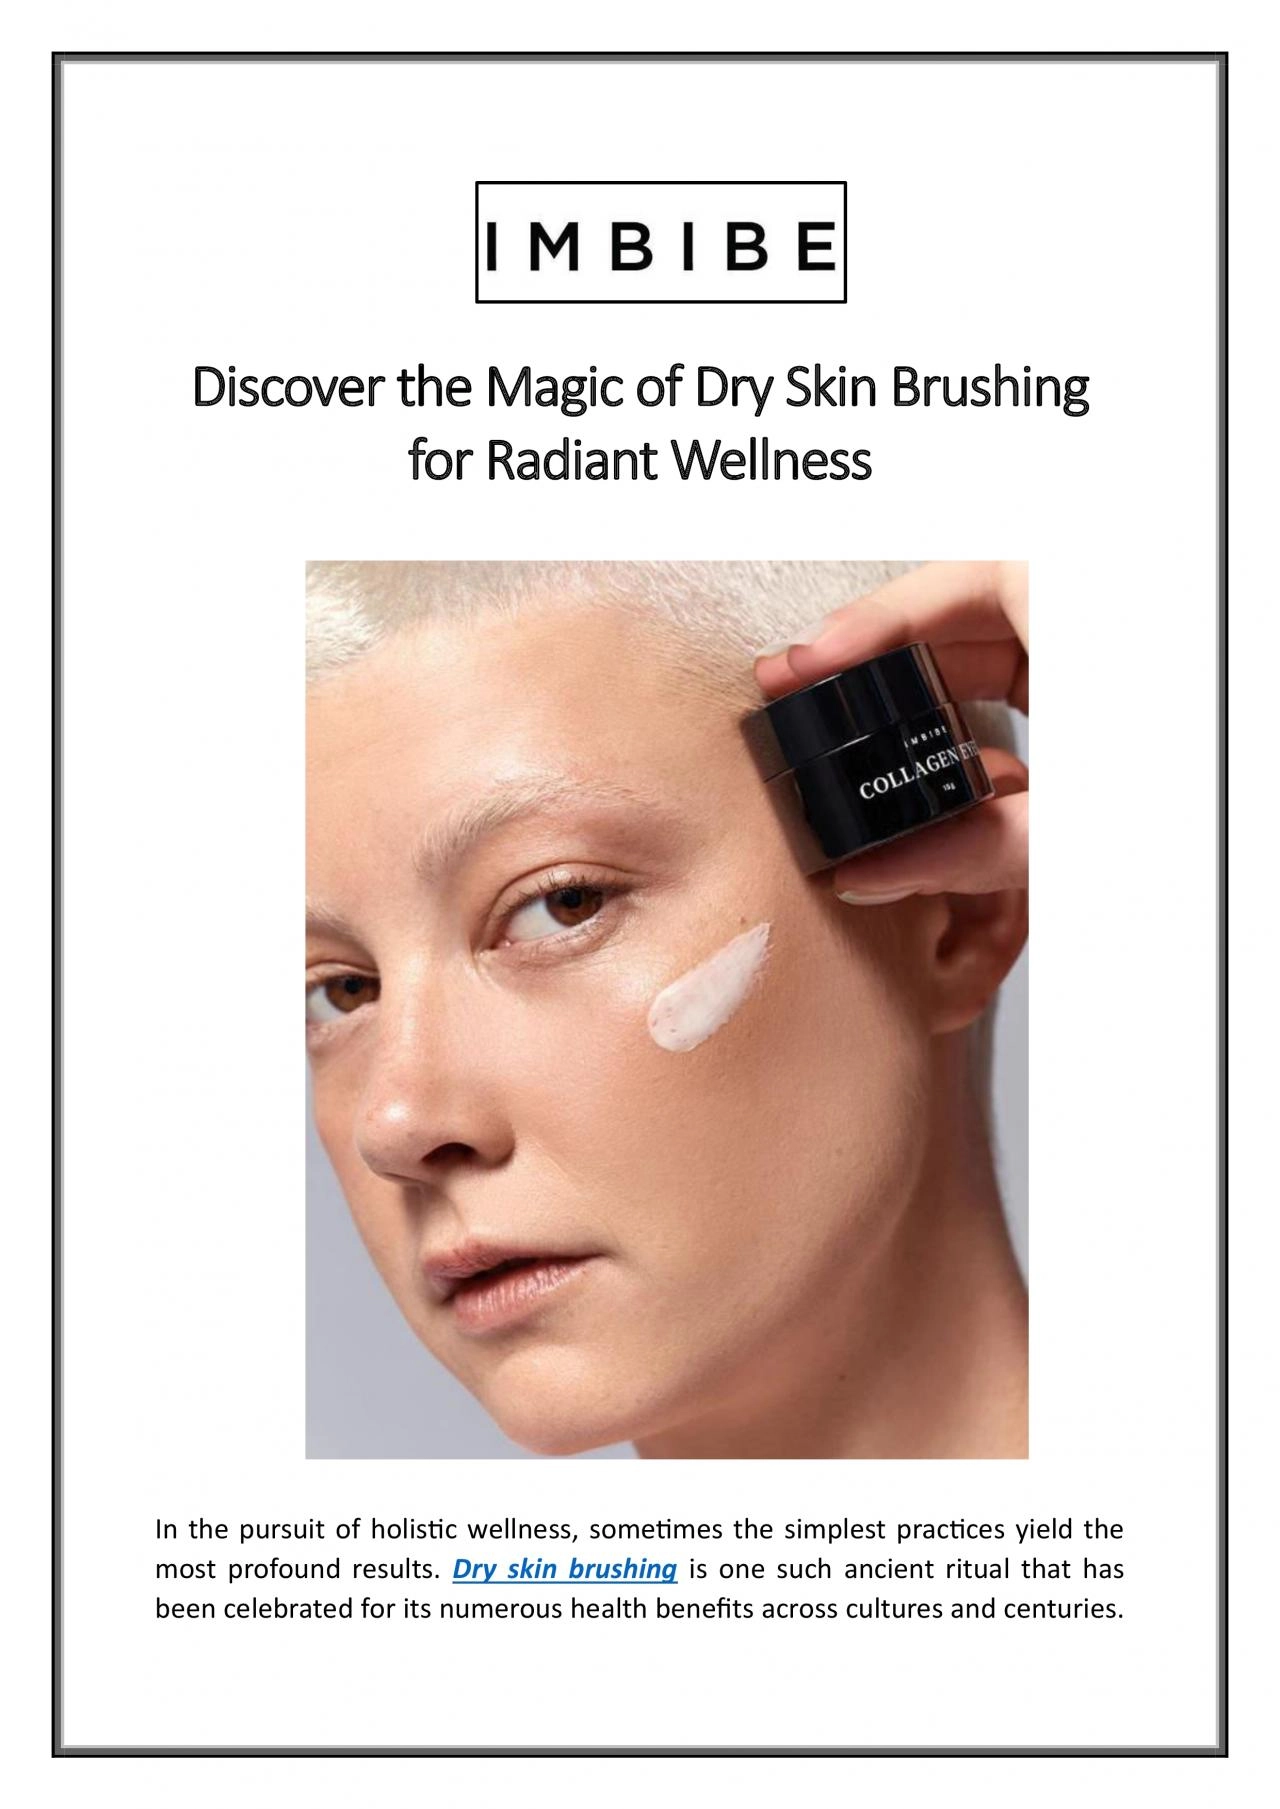 Discover the Magic of Dry Skin Brushing for Radiant Wellness